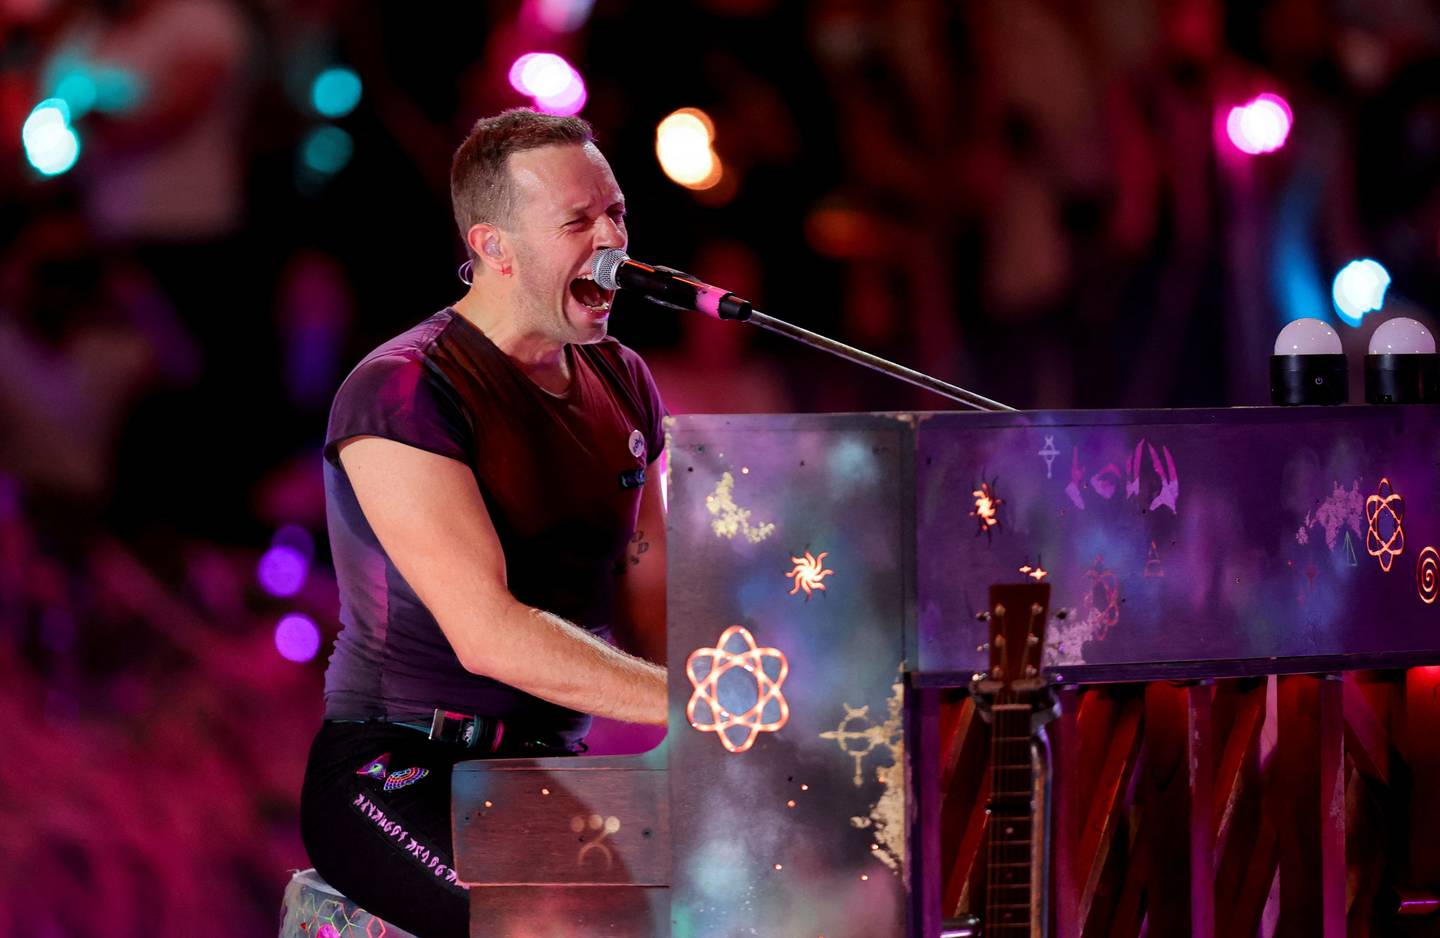 Chris Martin of the band Coldplay performs at Expo 2020 Dubai. Reuters